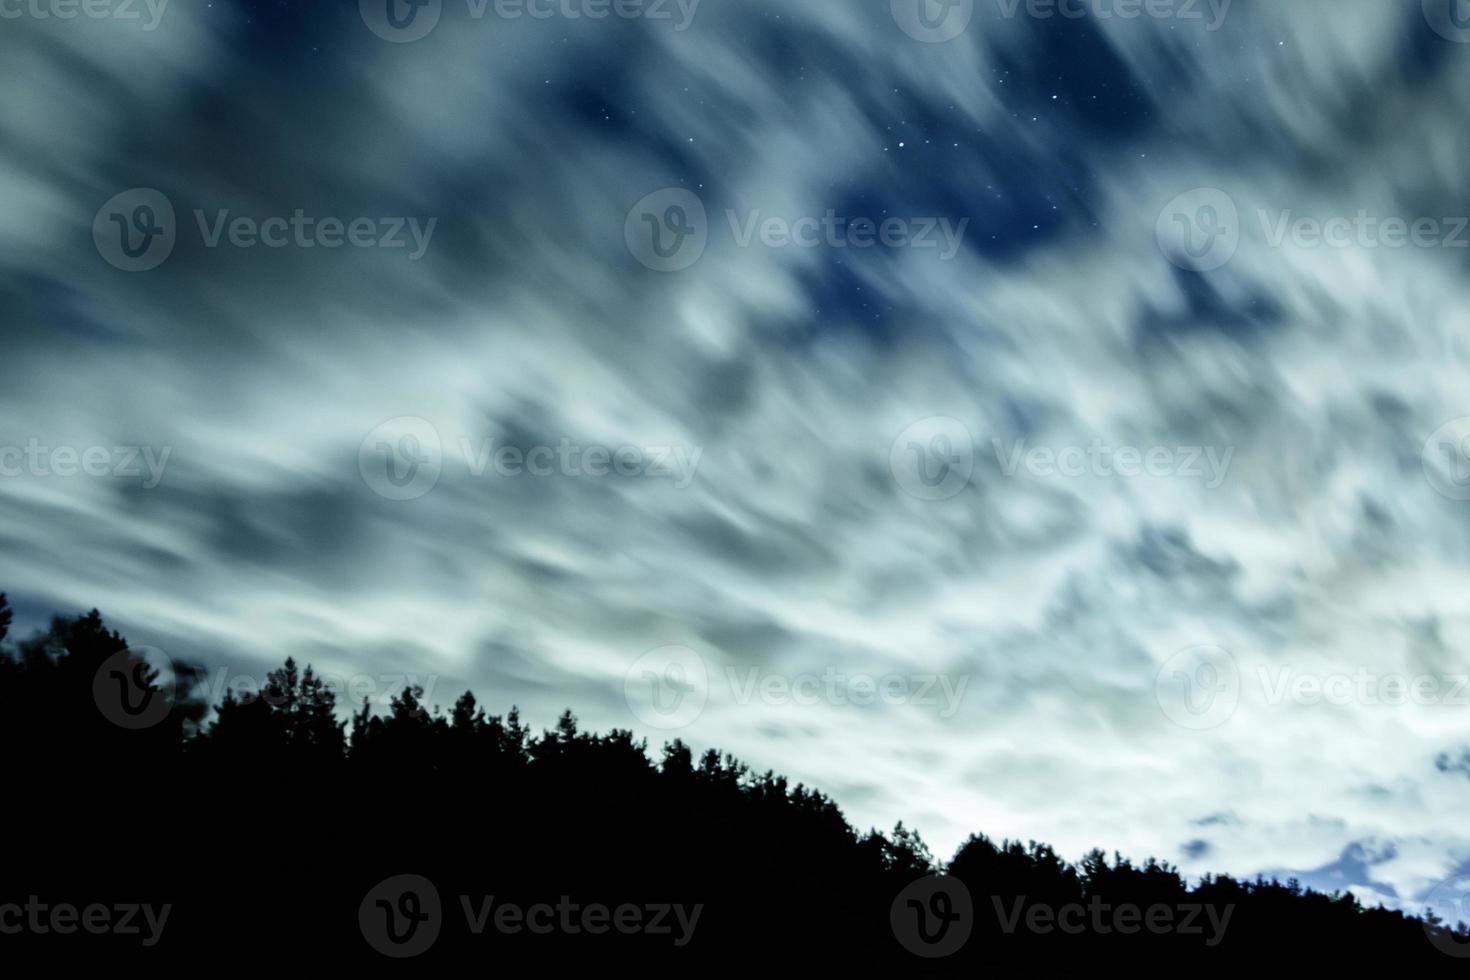 Night sky with stars and clouds in motion photo